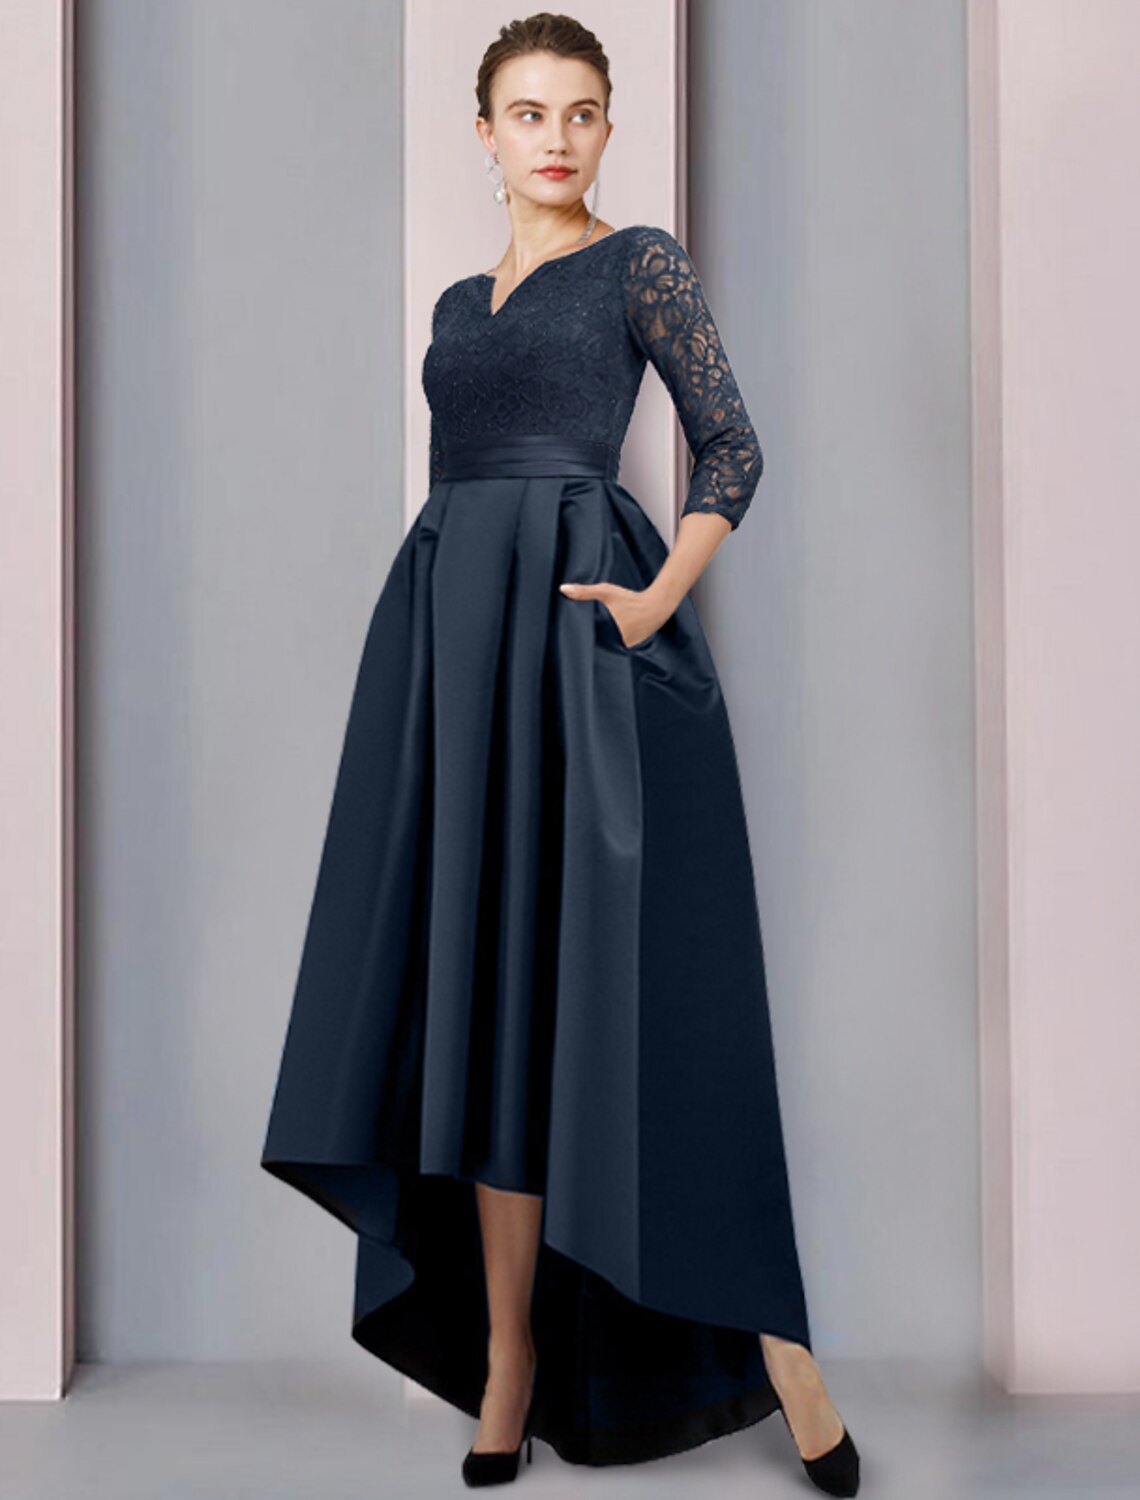 A-Line Mother of the Bride Dress Wedding Guest Elegant High Low Scoop Neck Asymmetrical Tea Length Satin Lace 3/4 Length Sleeve with Pleats Appliques